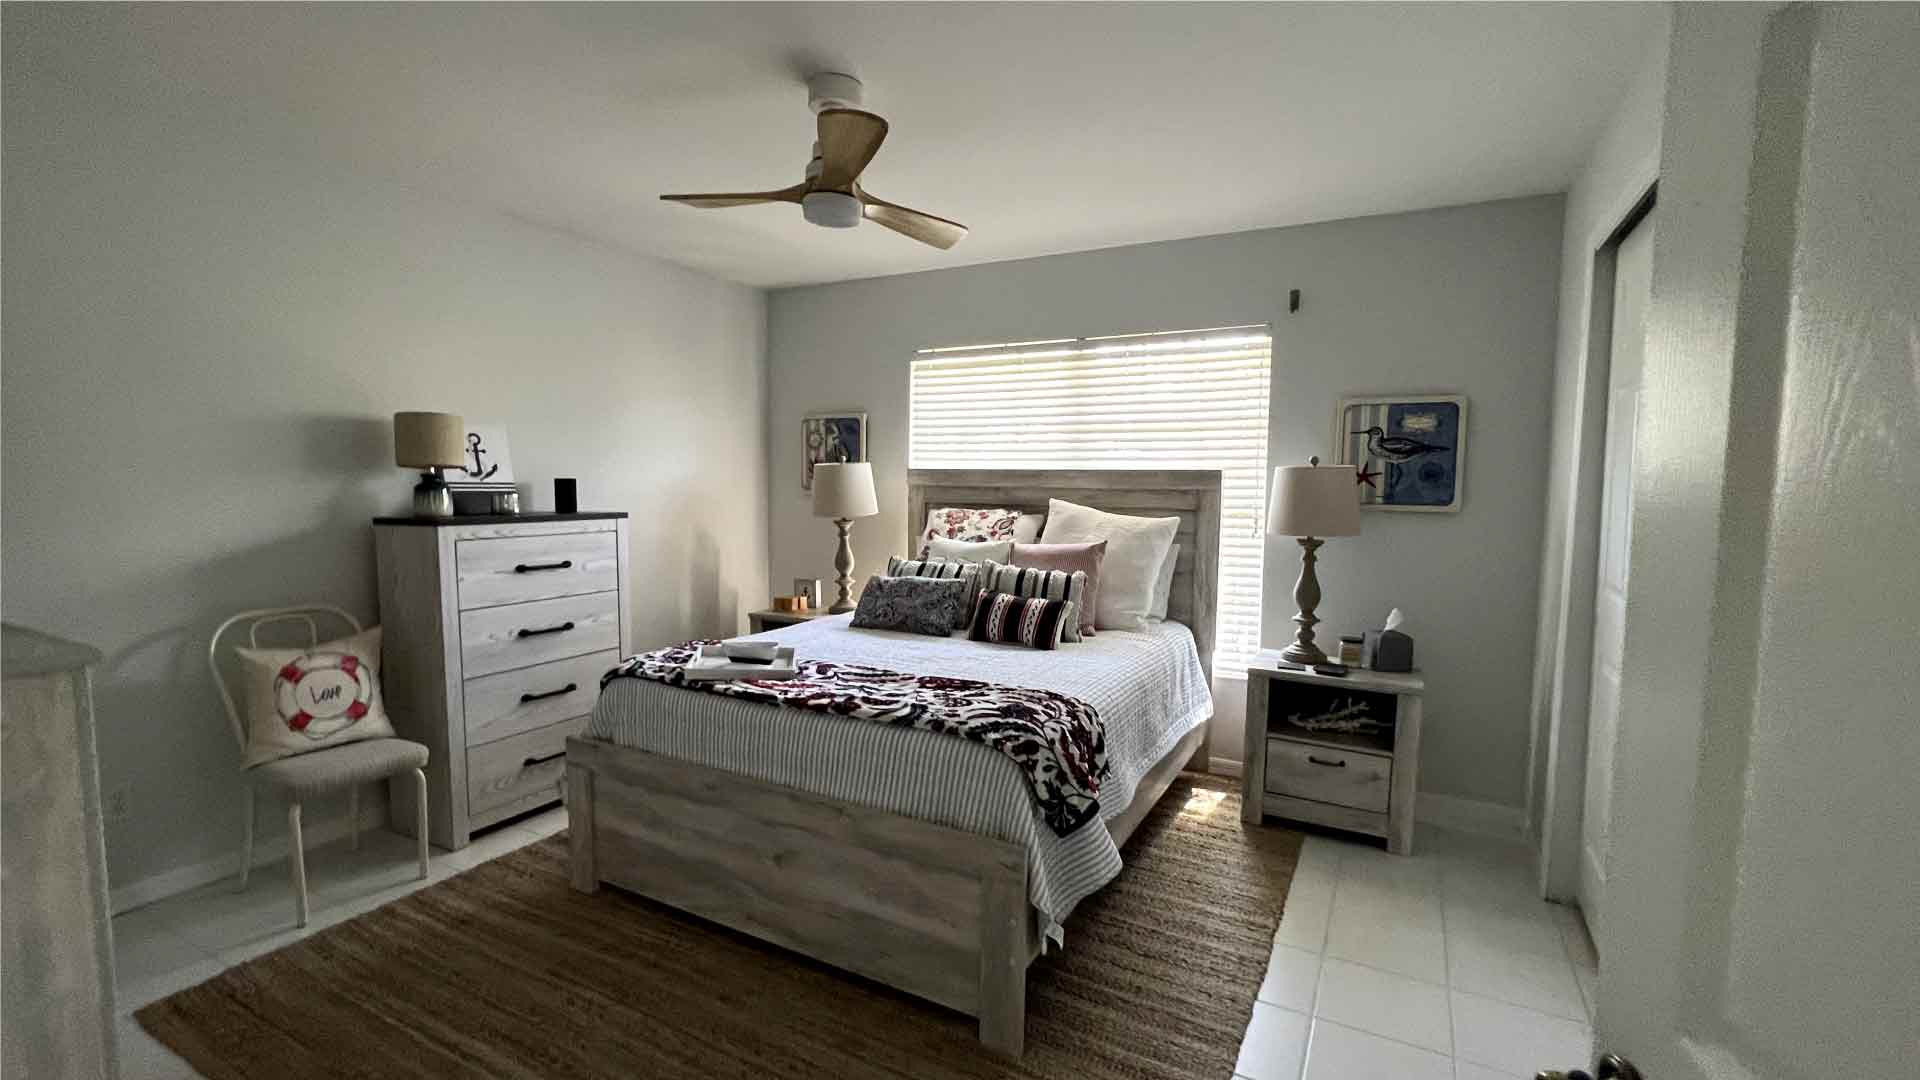 Bedroom cleaning - Deep cleaning in Cape Coral by Goldmillio - Mar 28